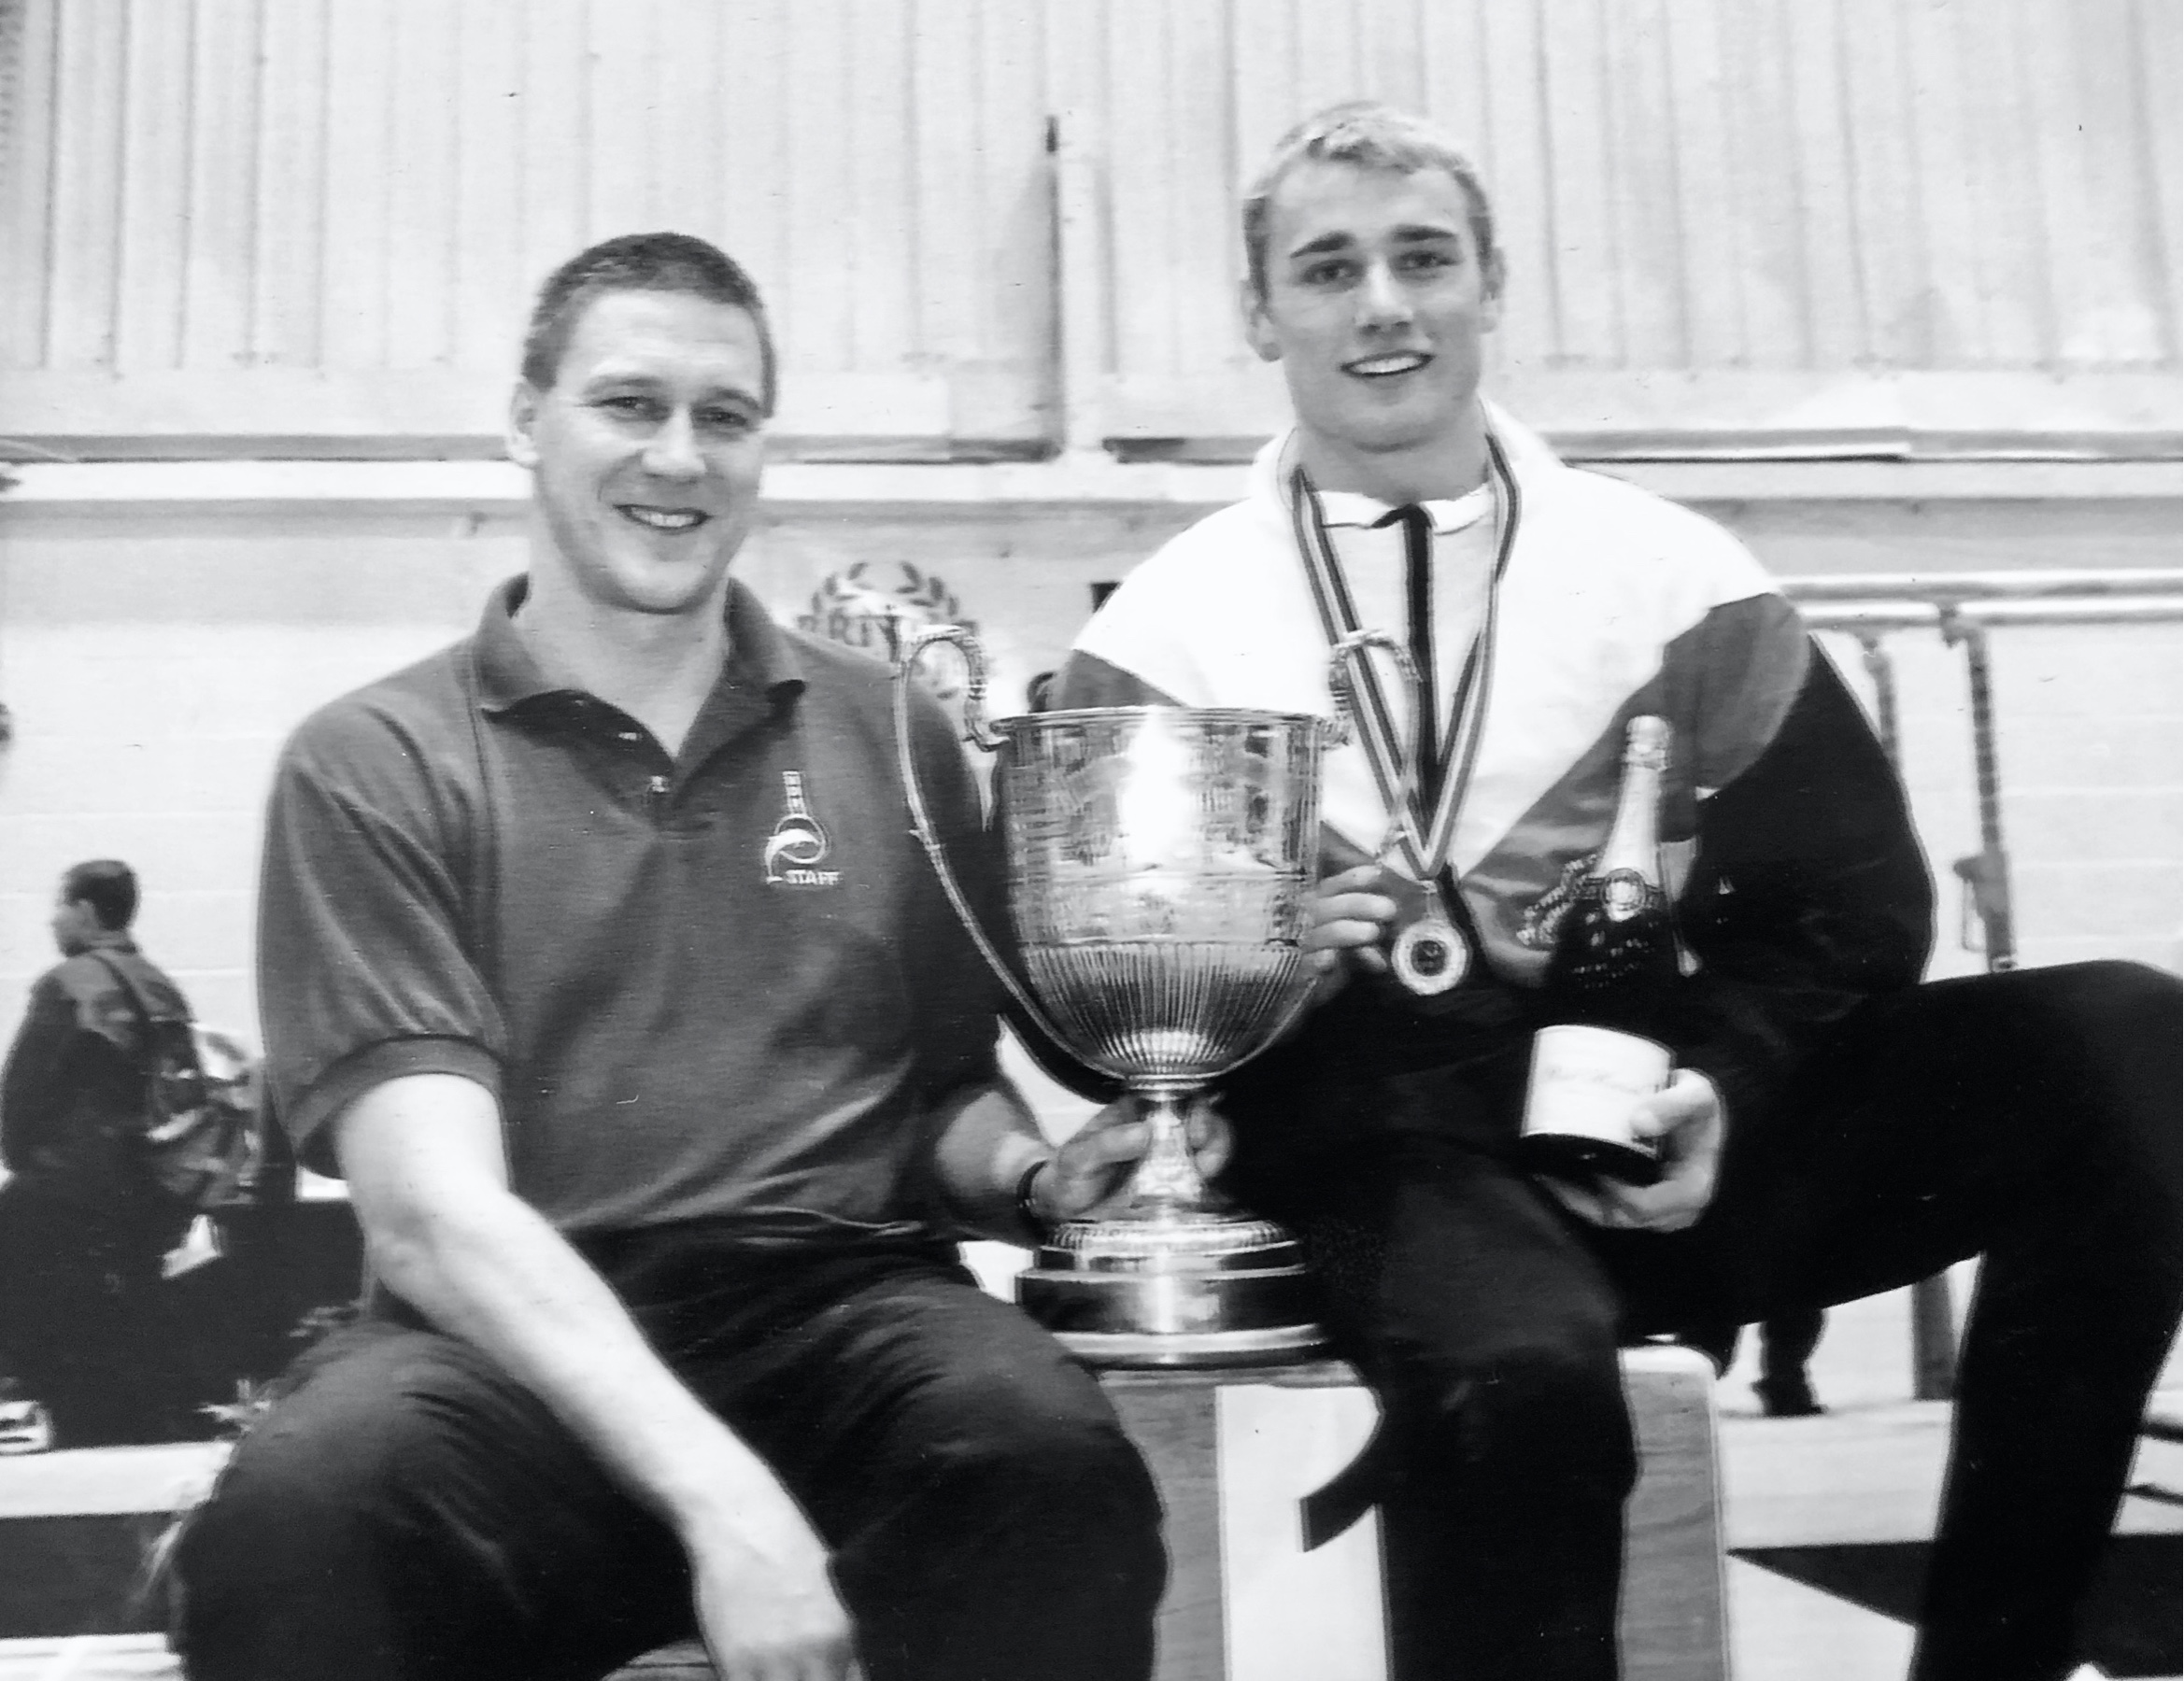 Kevin with Martin Reddin after winning the british championship in 1997